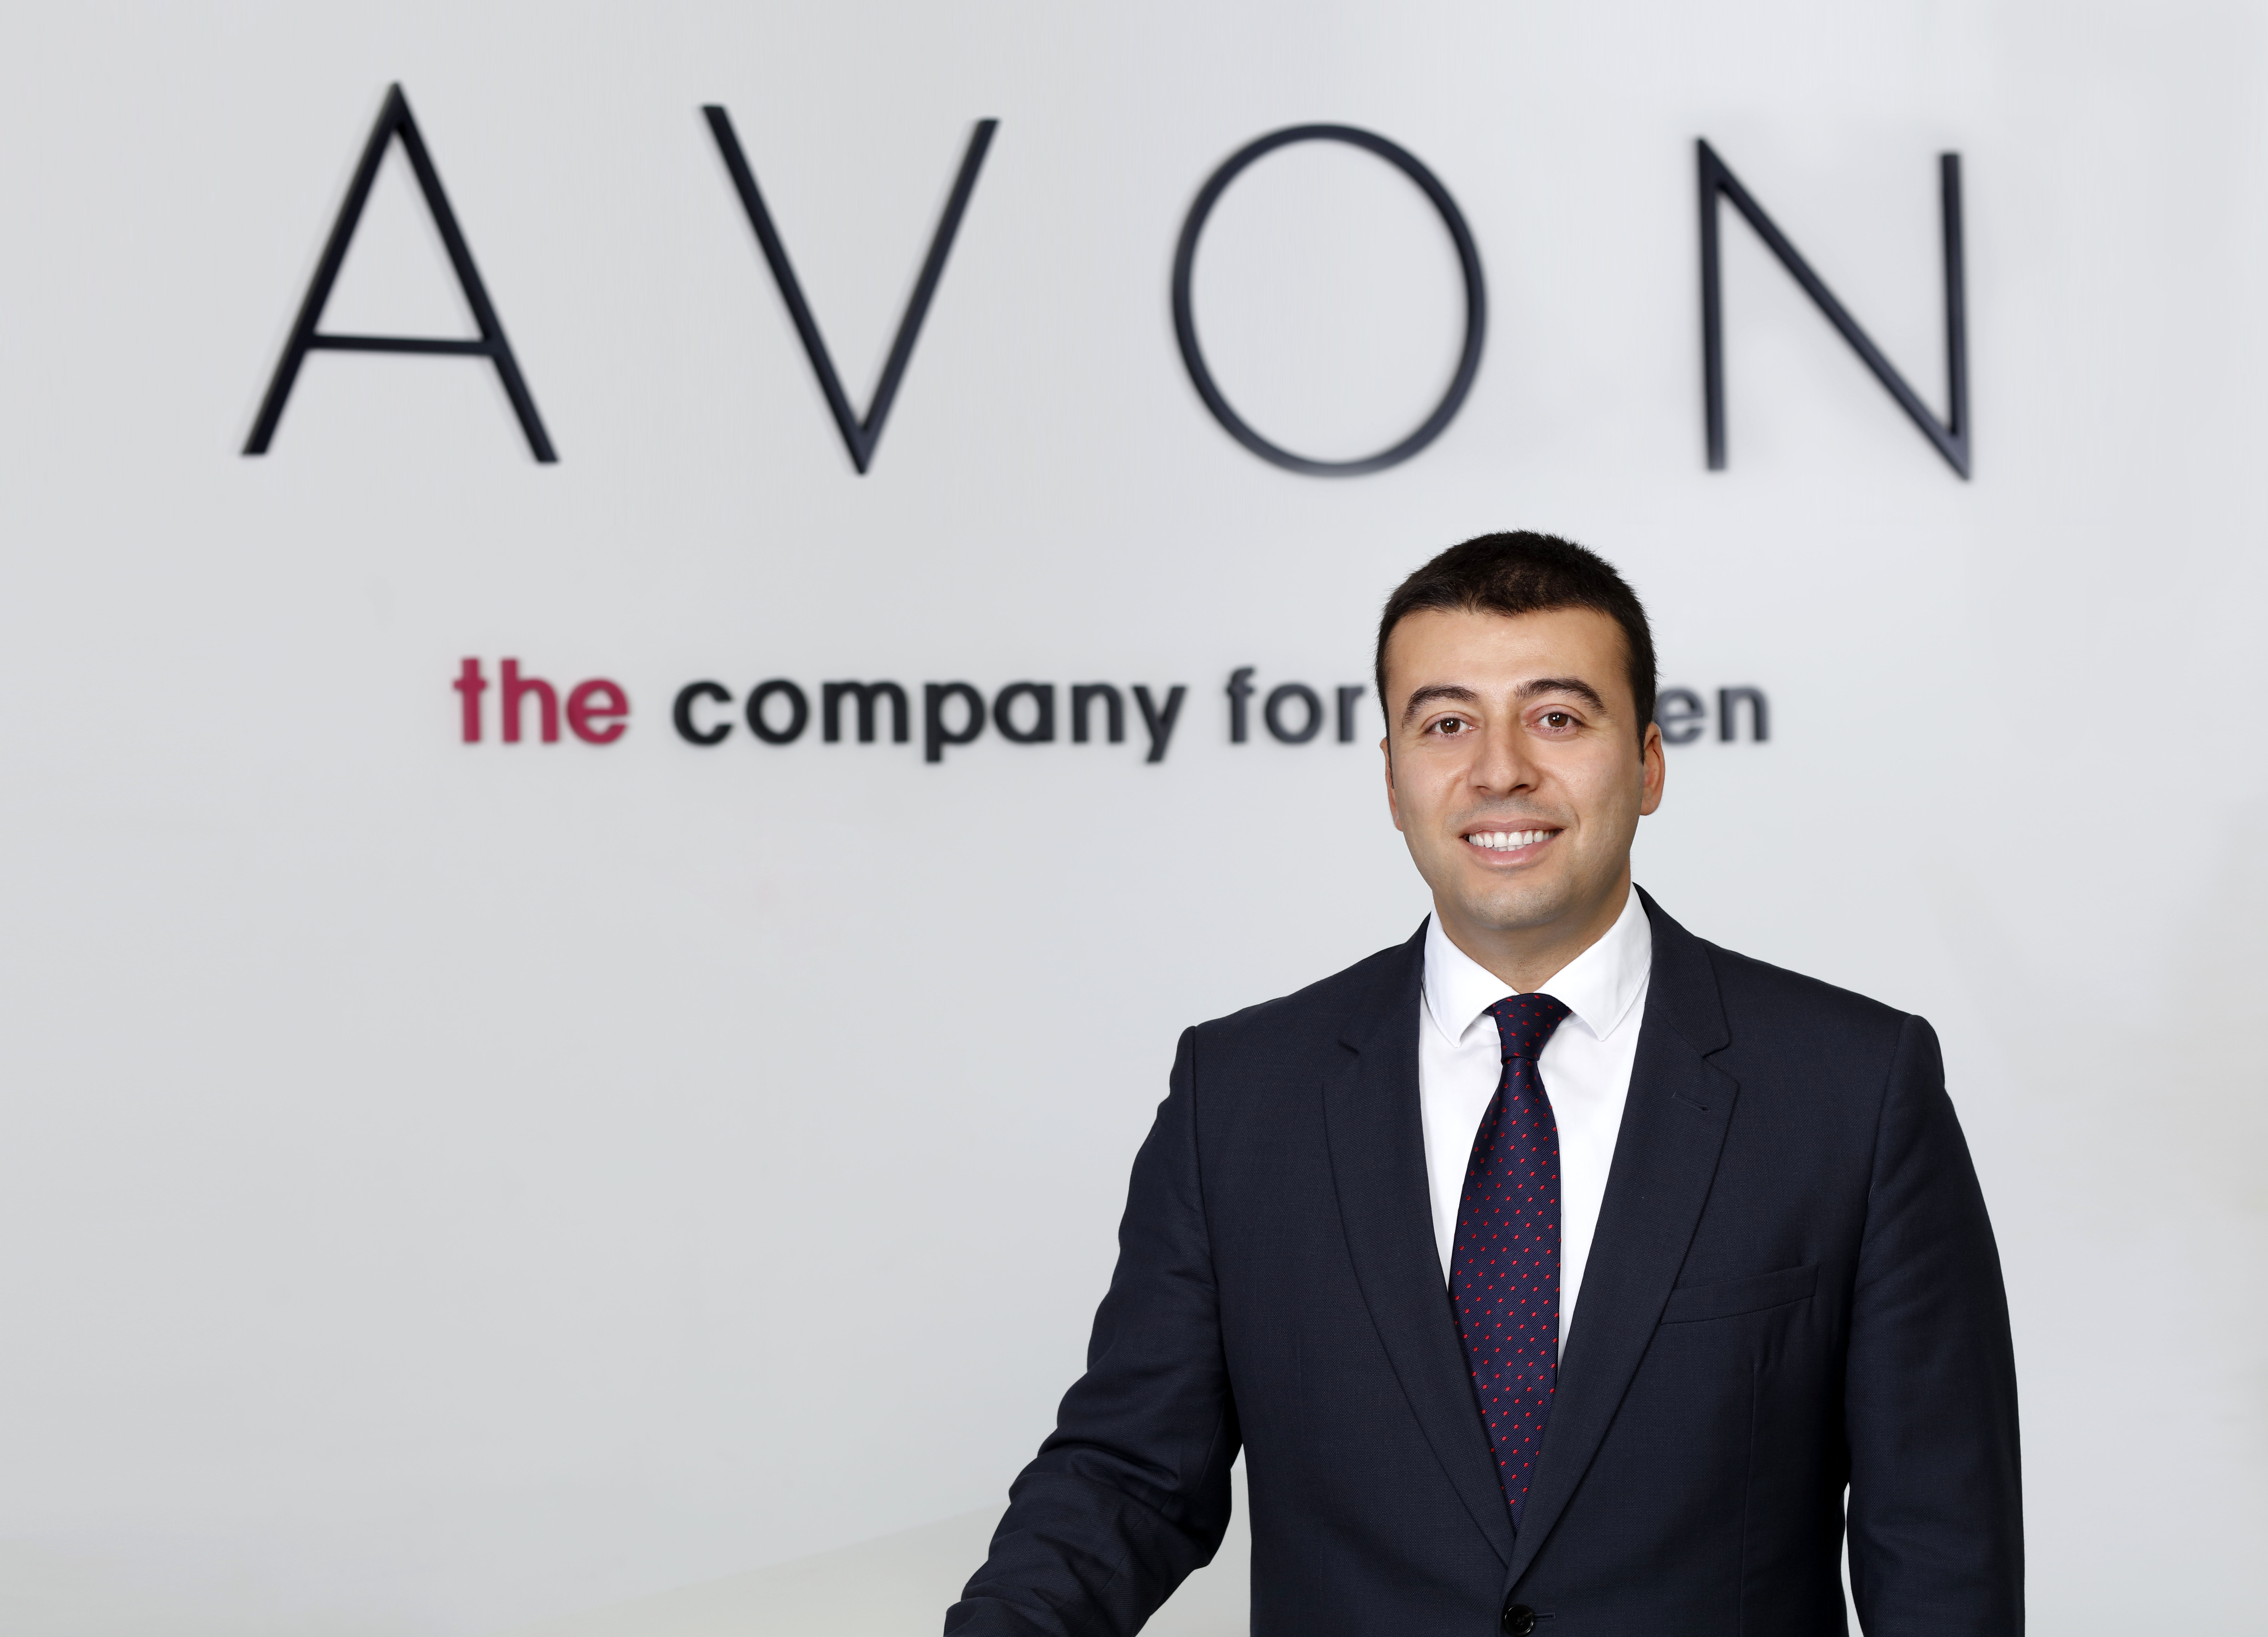 Avon Turkey’s General Manager Is New President of the Turkish Direct Selling Association